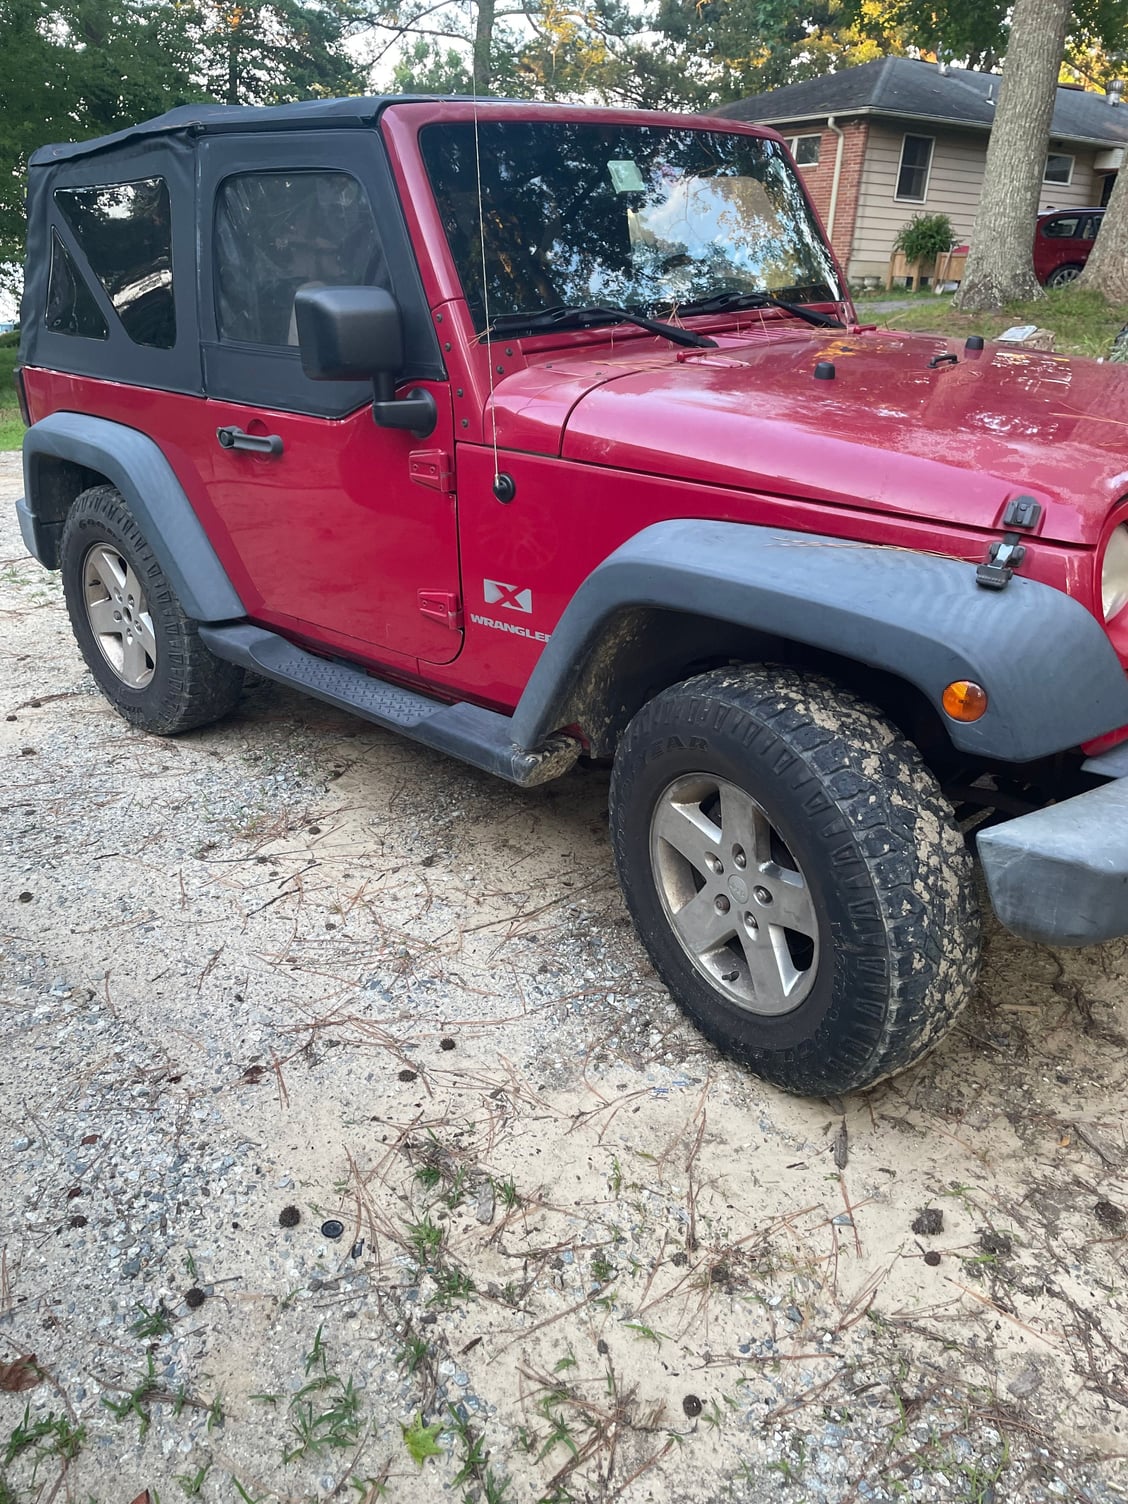 Cracked Block, New Engine Dilemma -  - The top destination for  Jeep JK and JL Wrangler news, rumors, and discussion